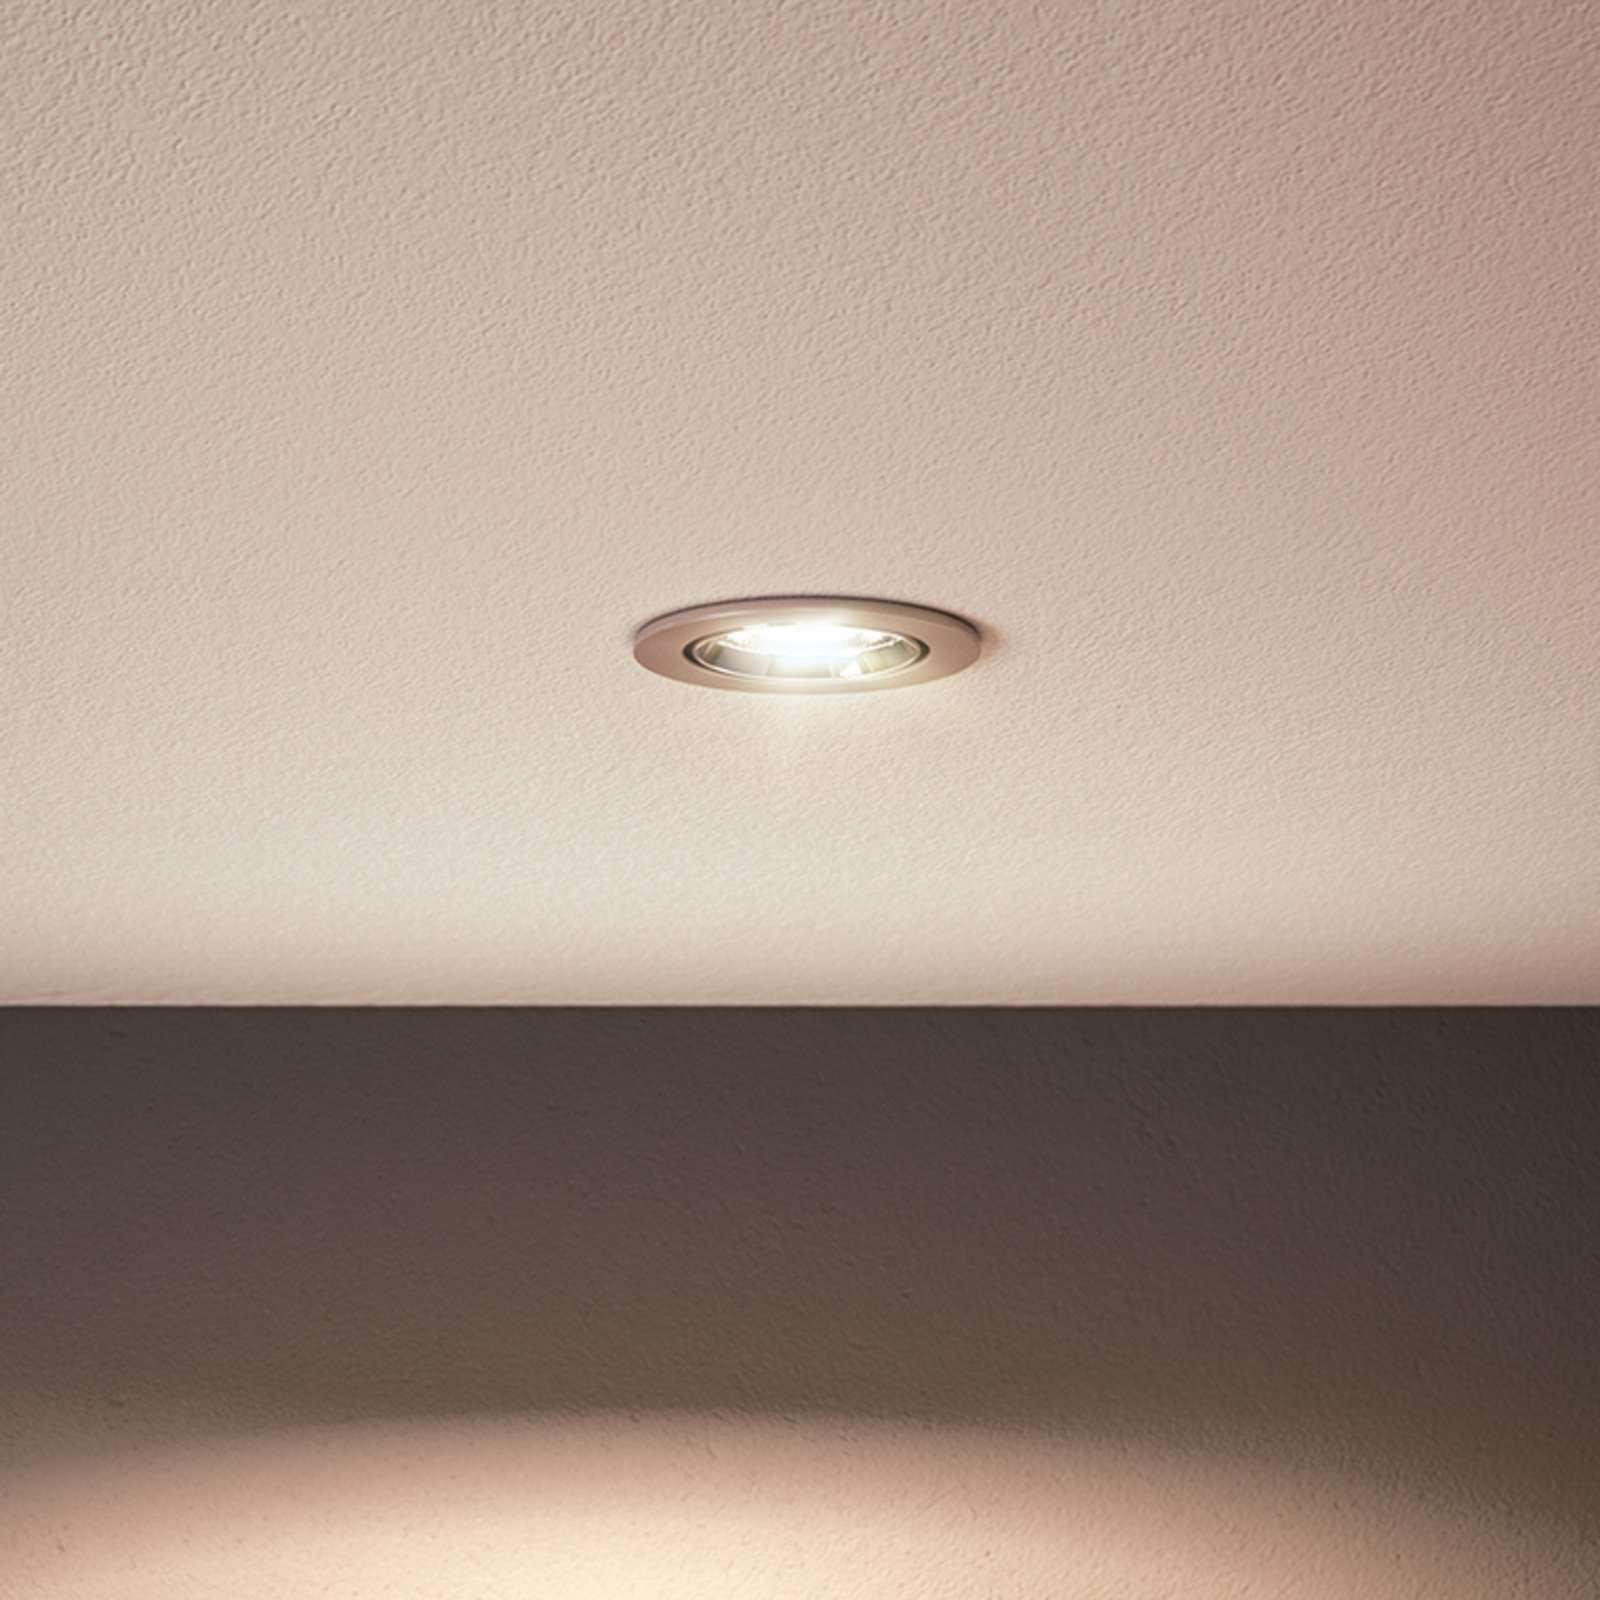 Philips LED GU10 4,6 W 390 lm 840 claire 36° x6